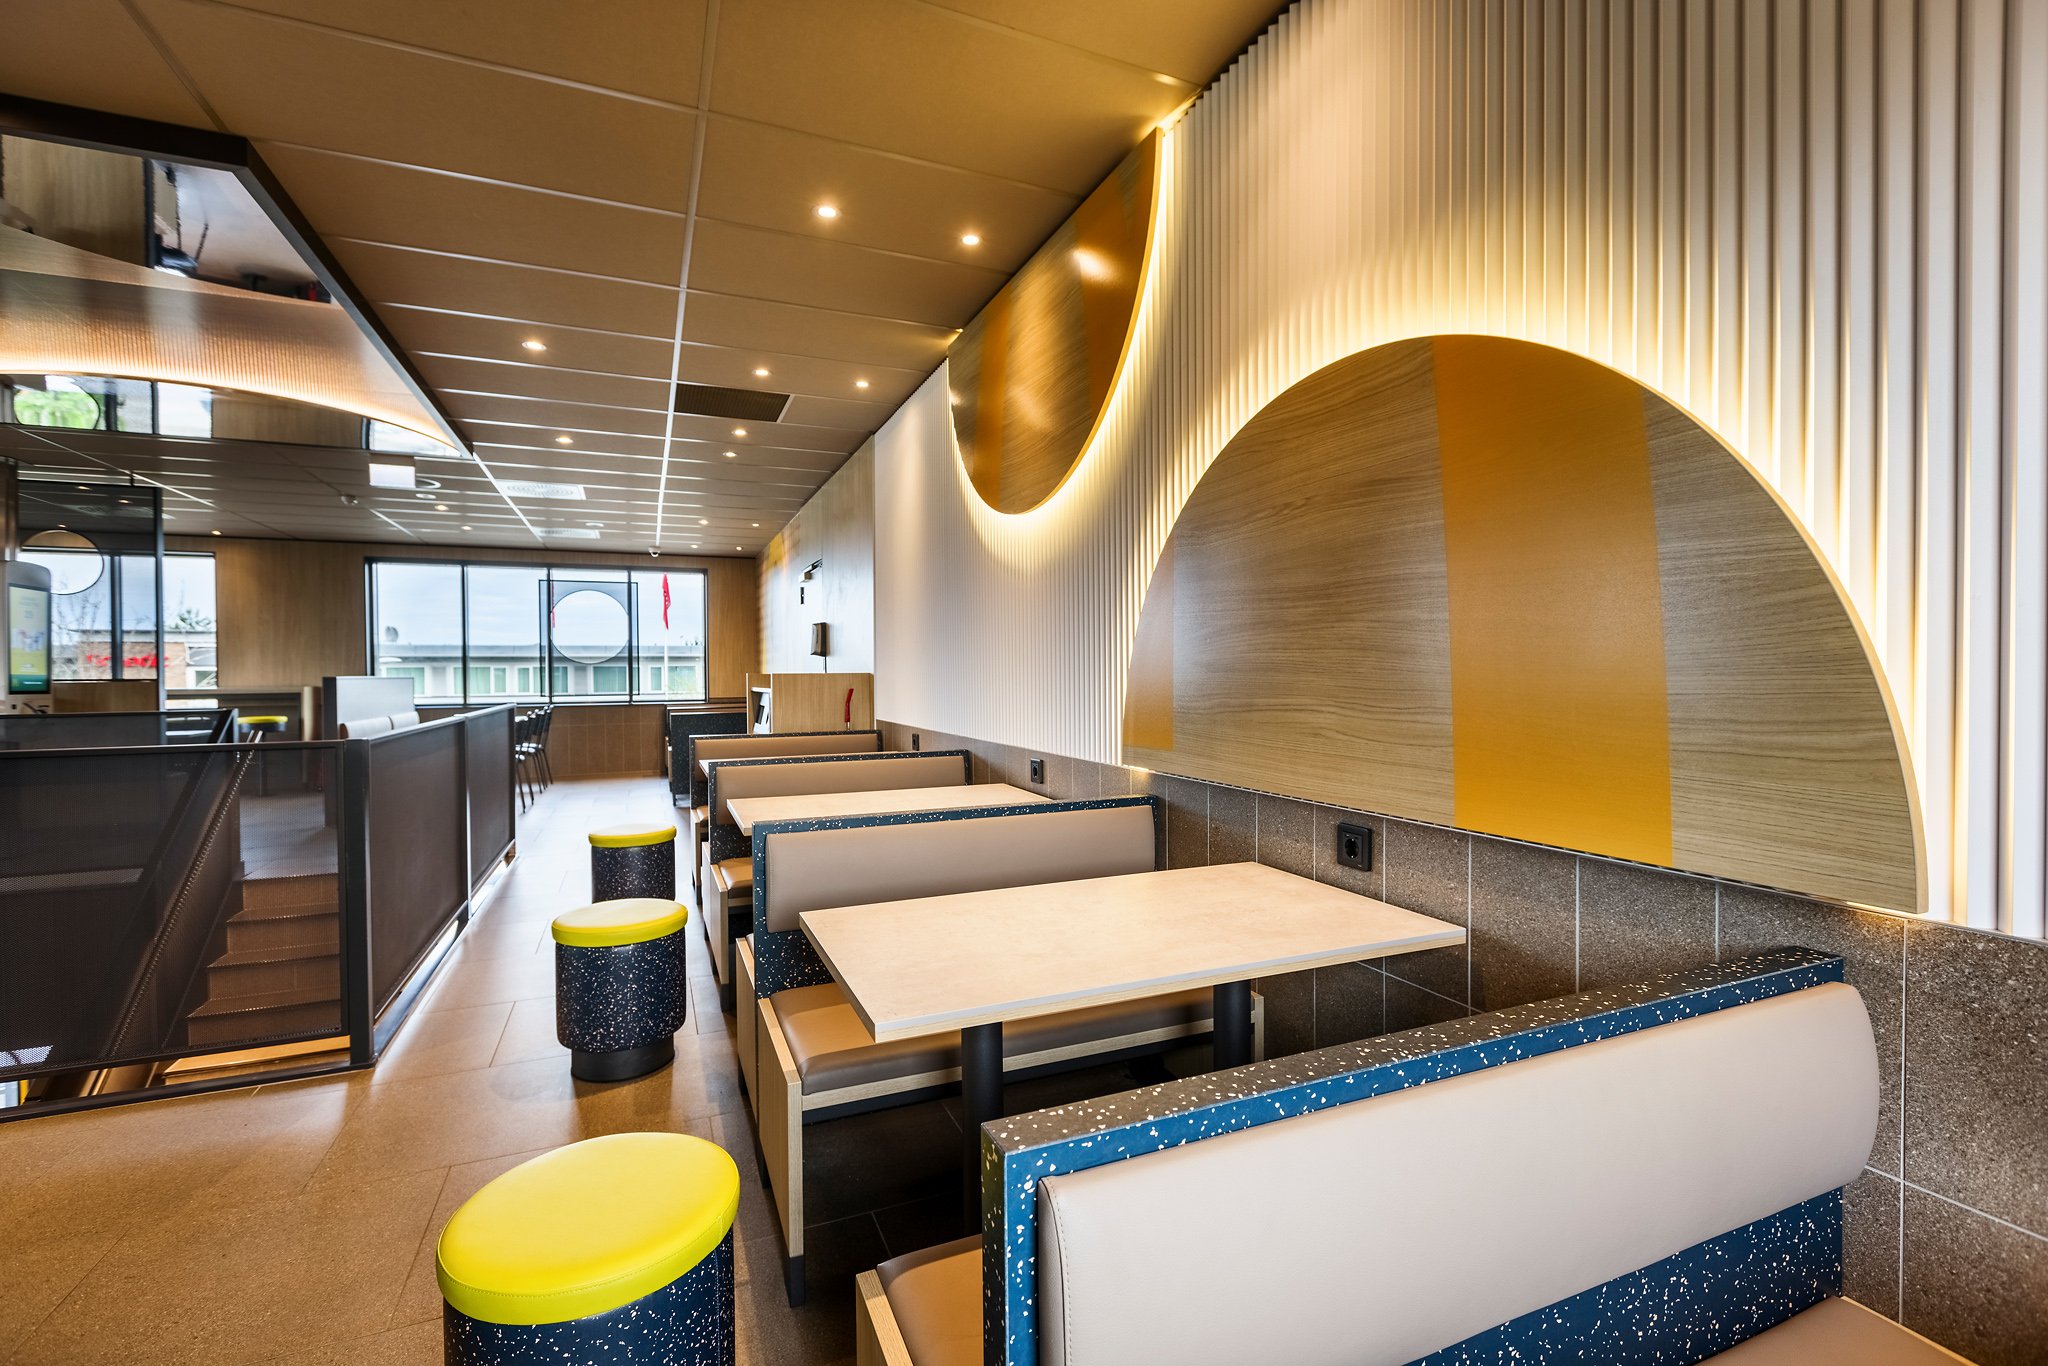 Dining booths and stools manufactured to brand standards by EIS Europe